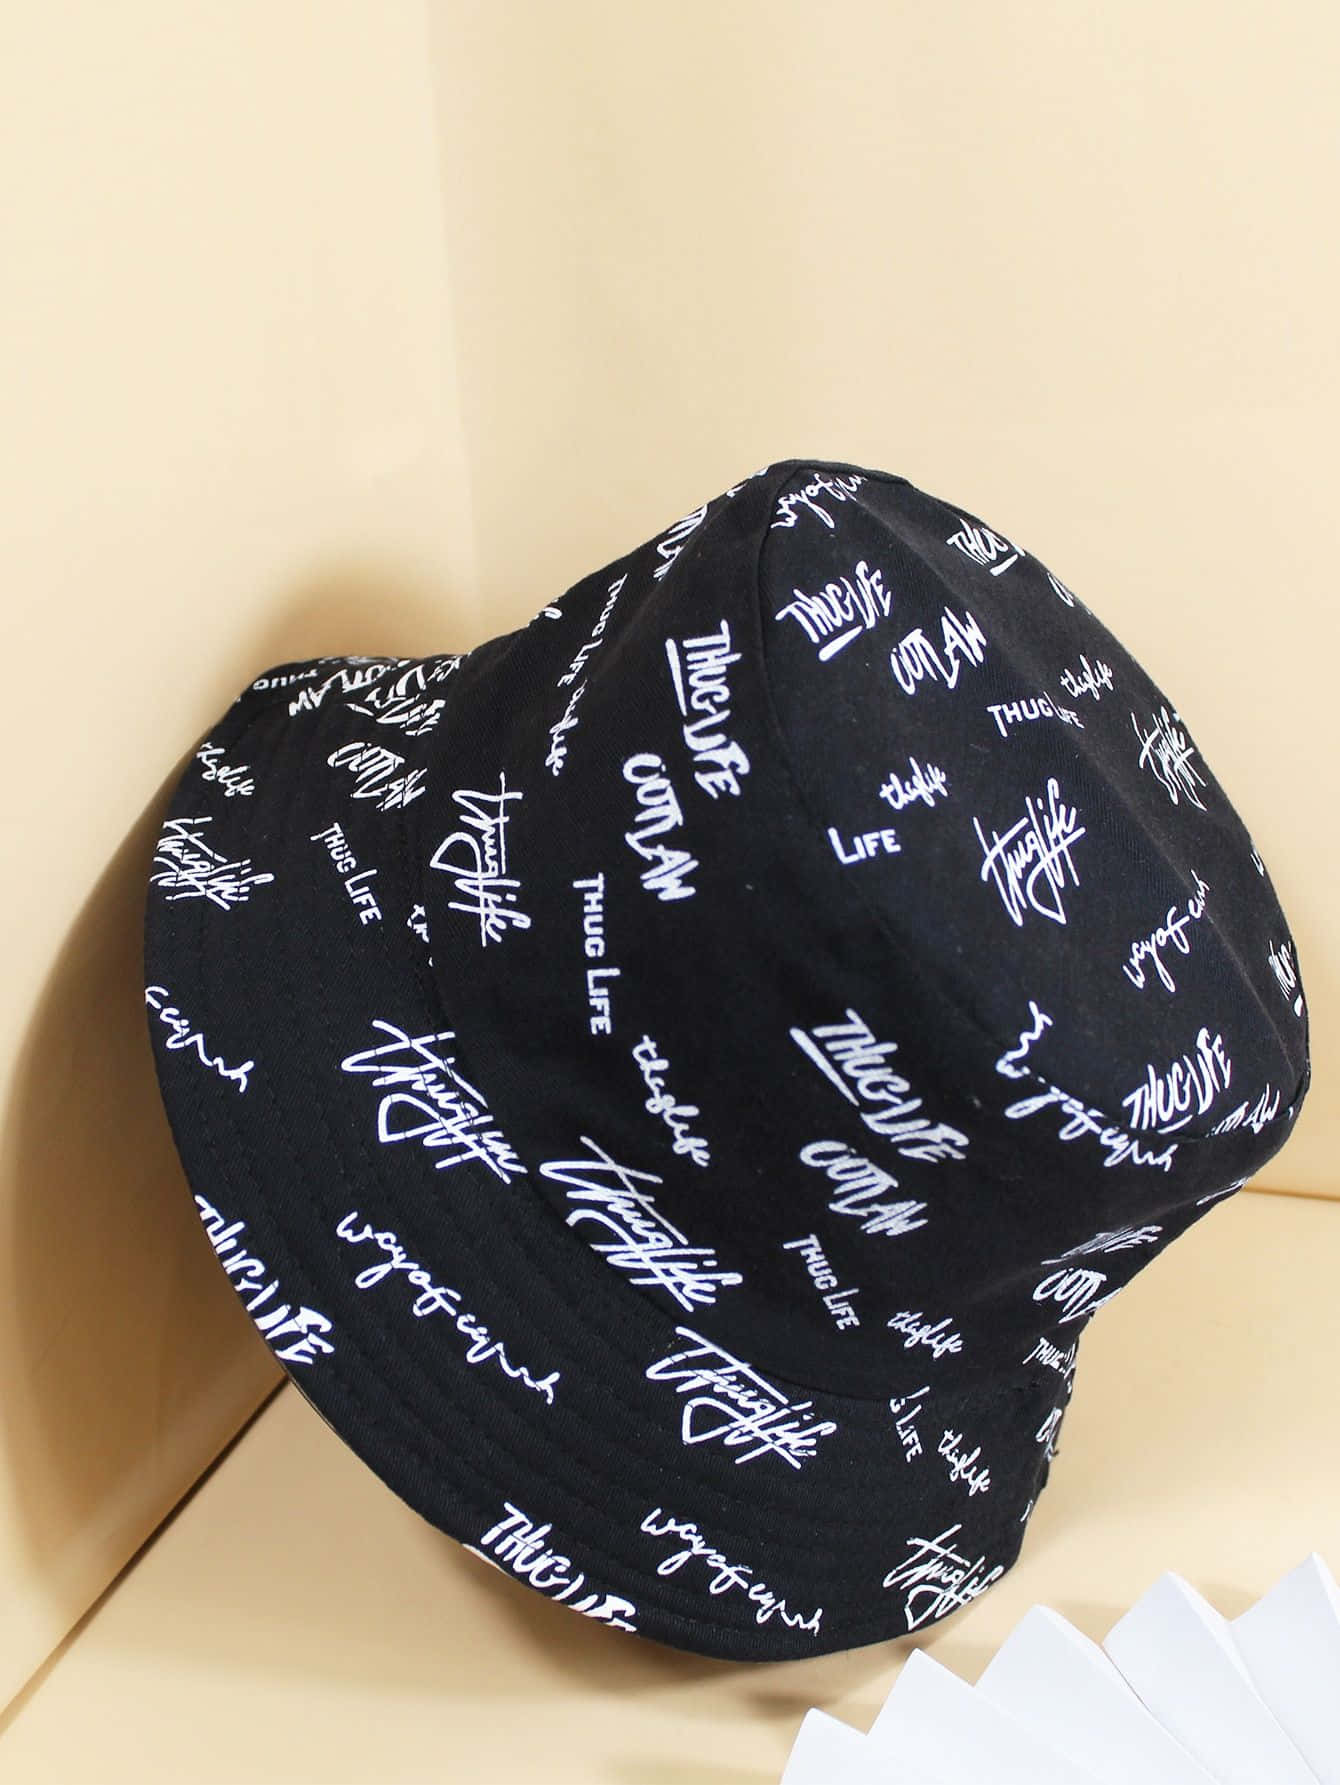 Stylish hat with a classic black ribbon on a white surface. Wallpaper